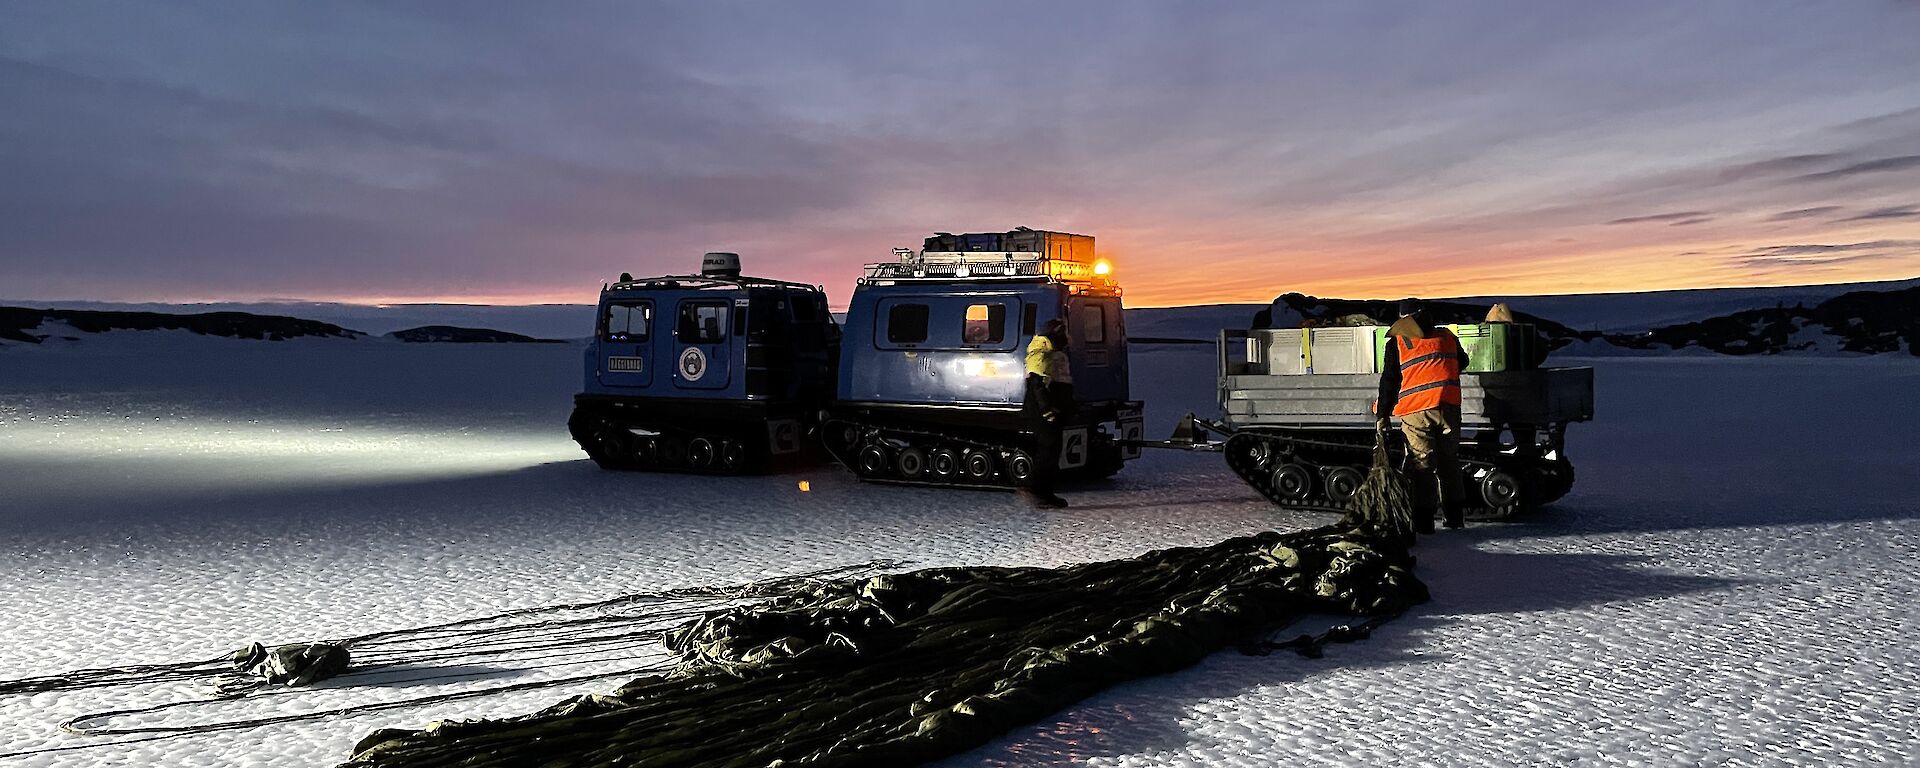 A dusky shot showing a paracute neatly laid on the ice being pulled toward a trailor sat behind a Hagglund